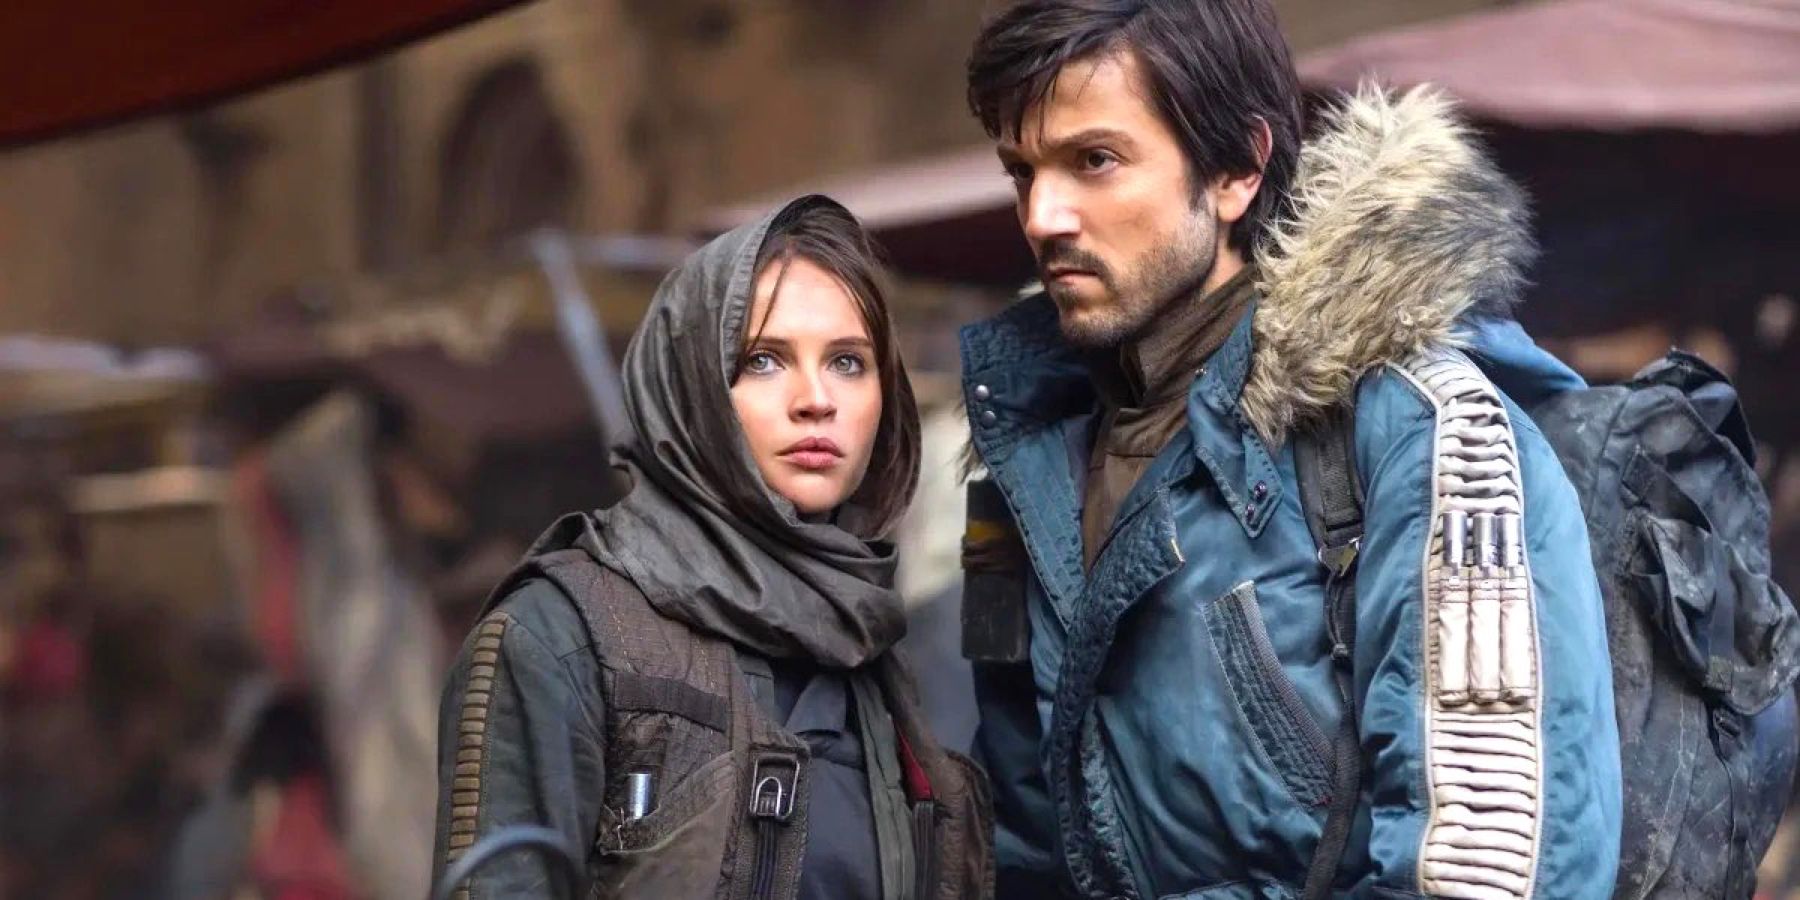 Cassian Andor and Jon Erso lay low in a market on the planet Jedha in Rogue One: A Star Wars Story.